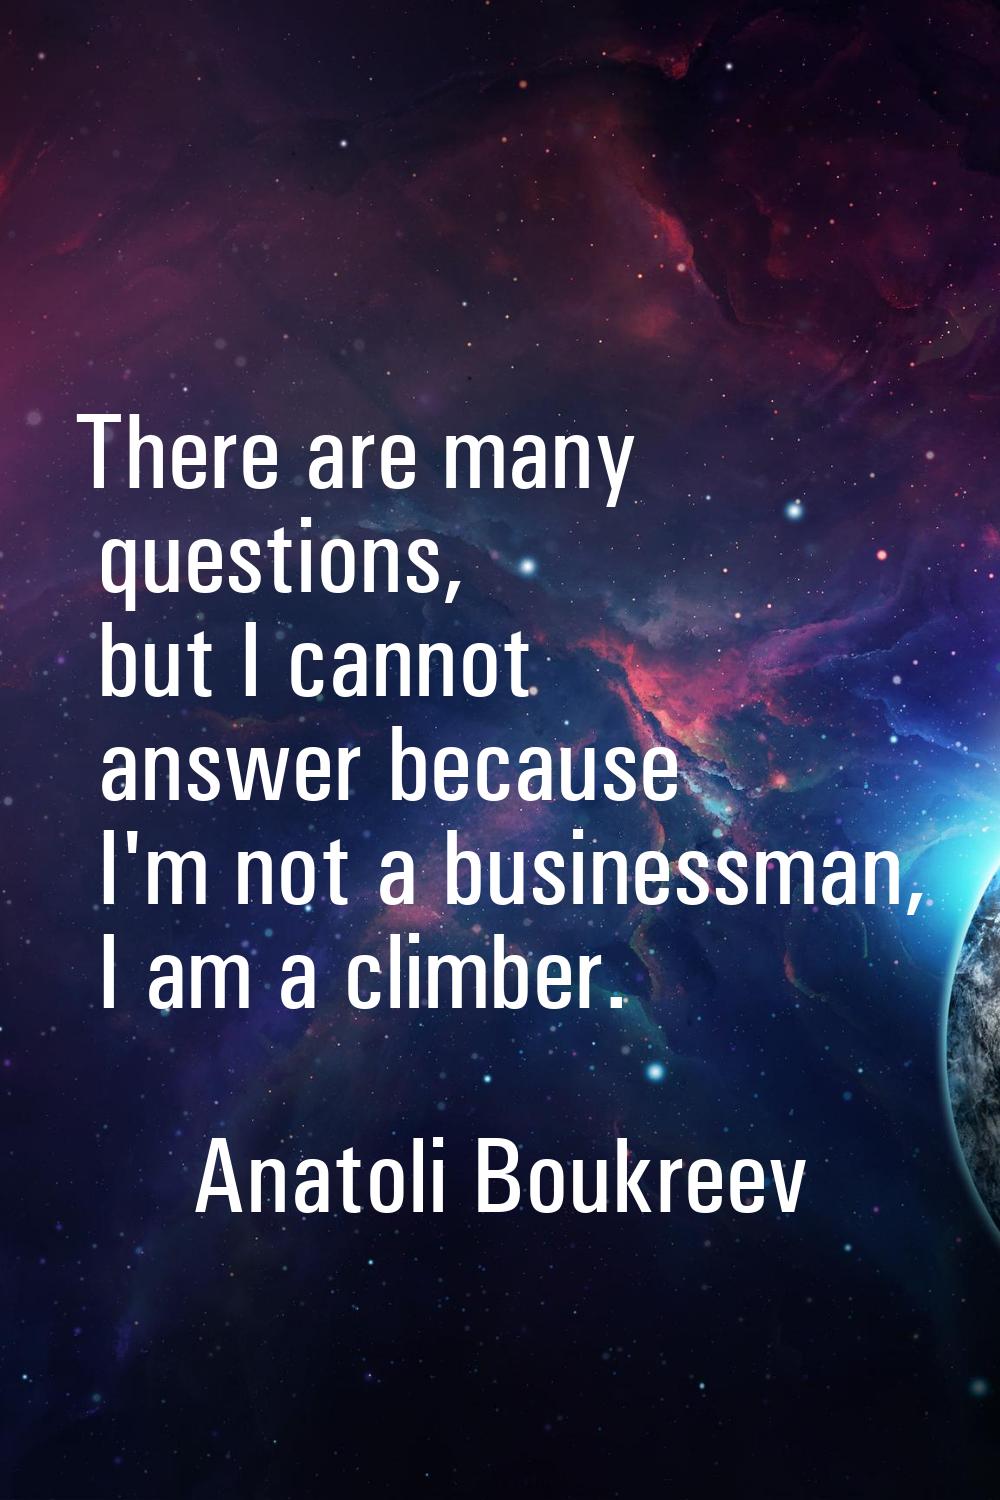 There are many questions, but I cannot answer because I'm not a businessman, I am a climber.